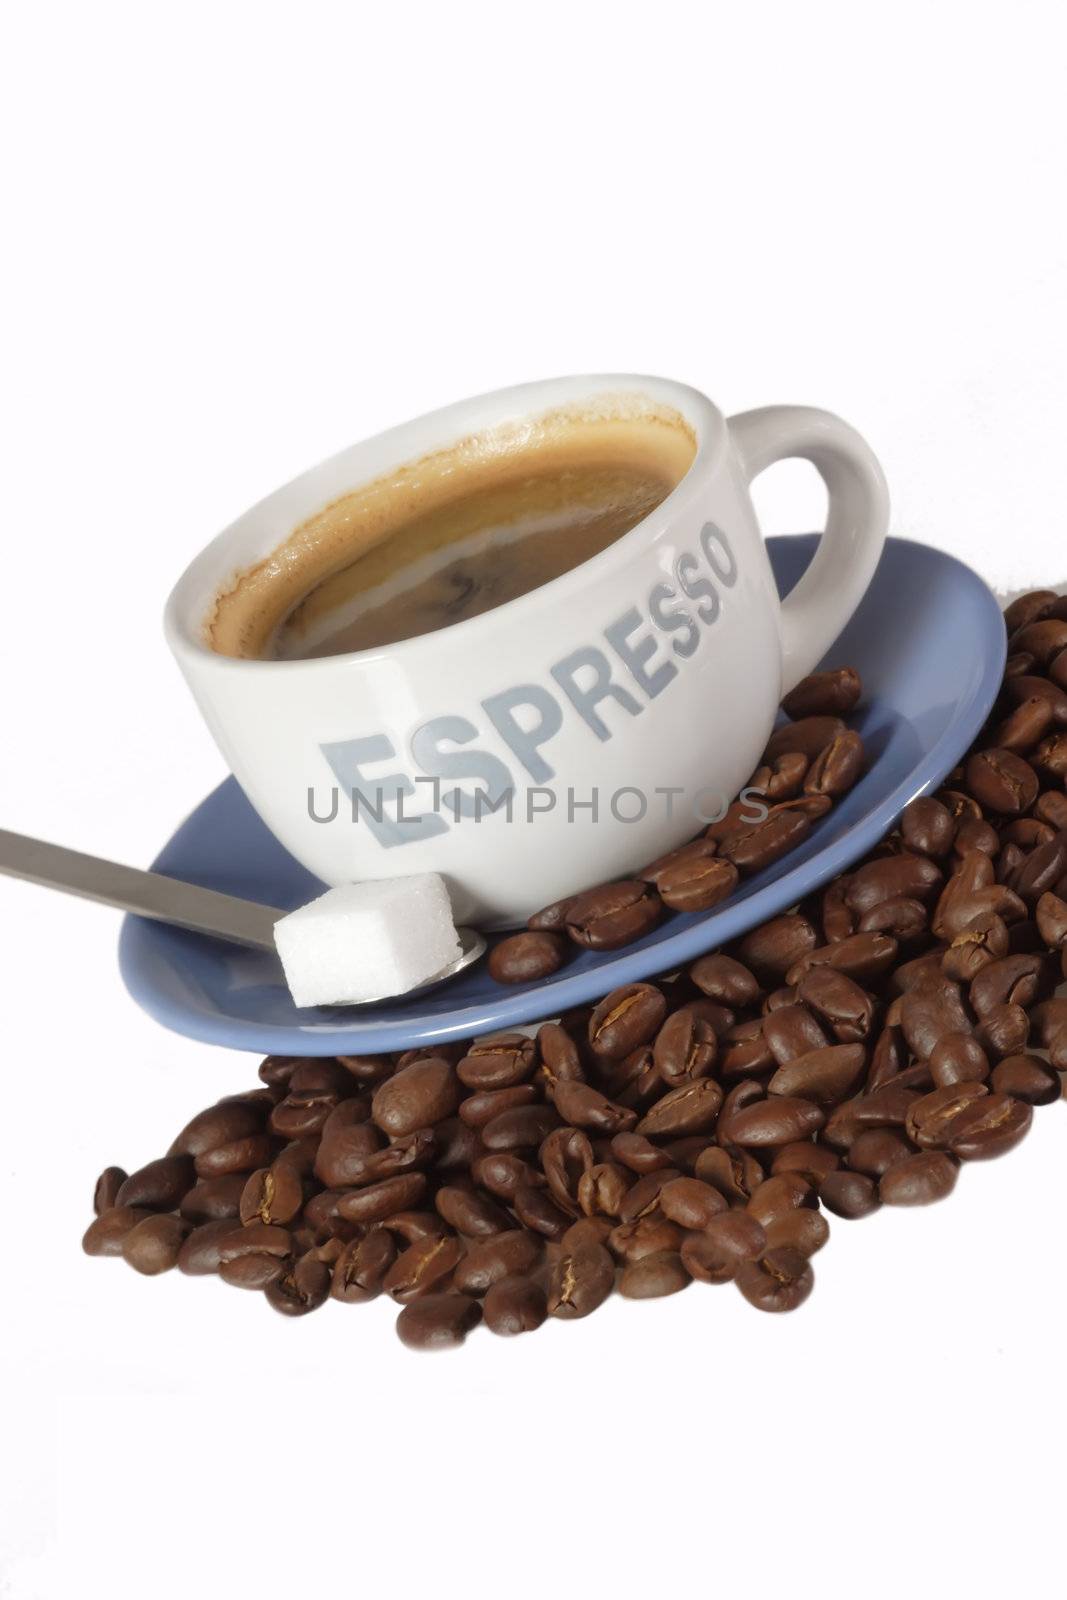 Expresso coffee with sugar over roasted coffee beans.
